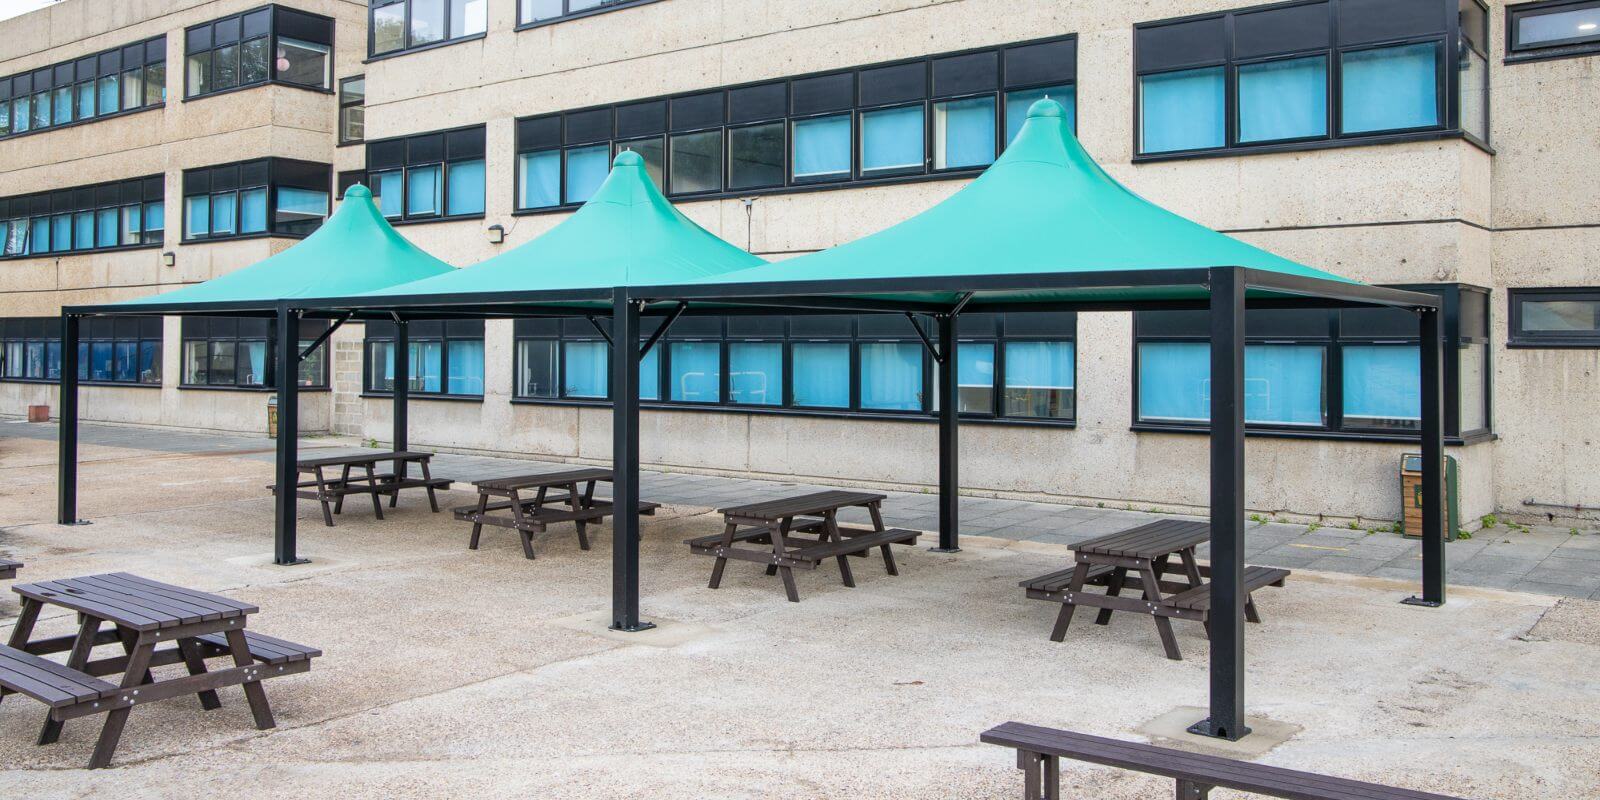 Green tepee canopies we made for Shooters Hill College